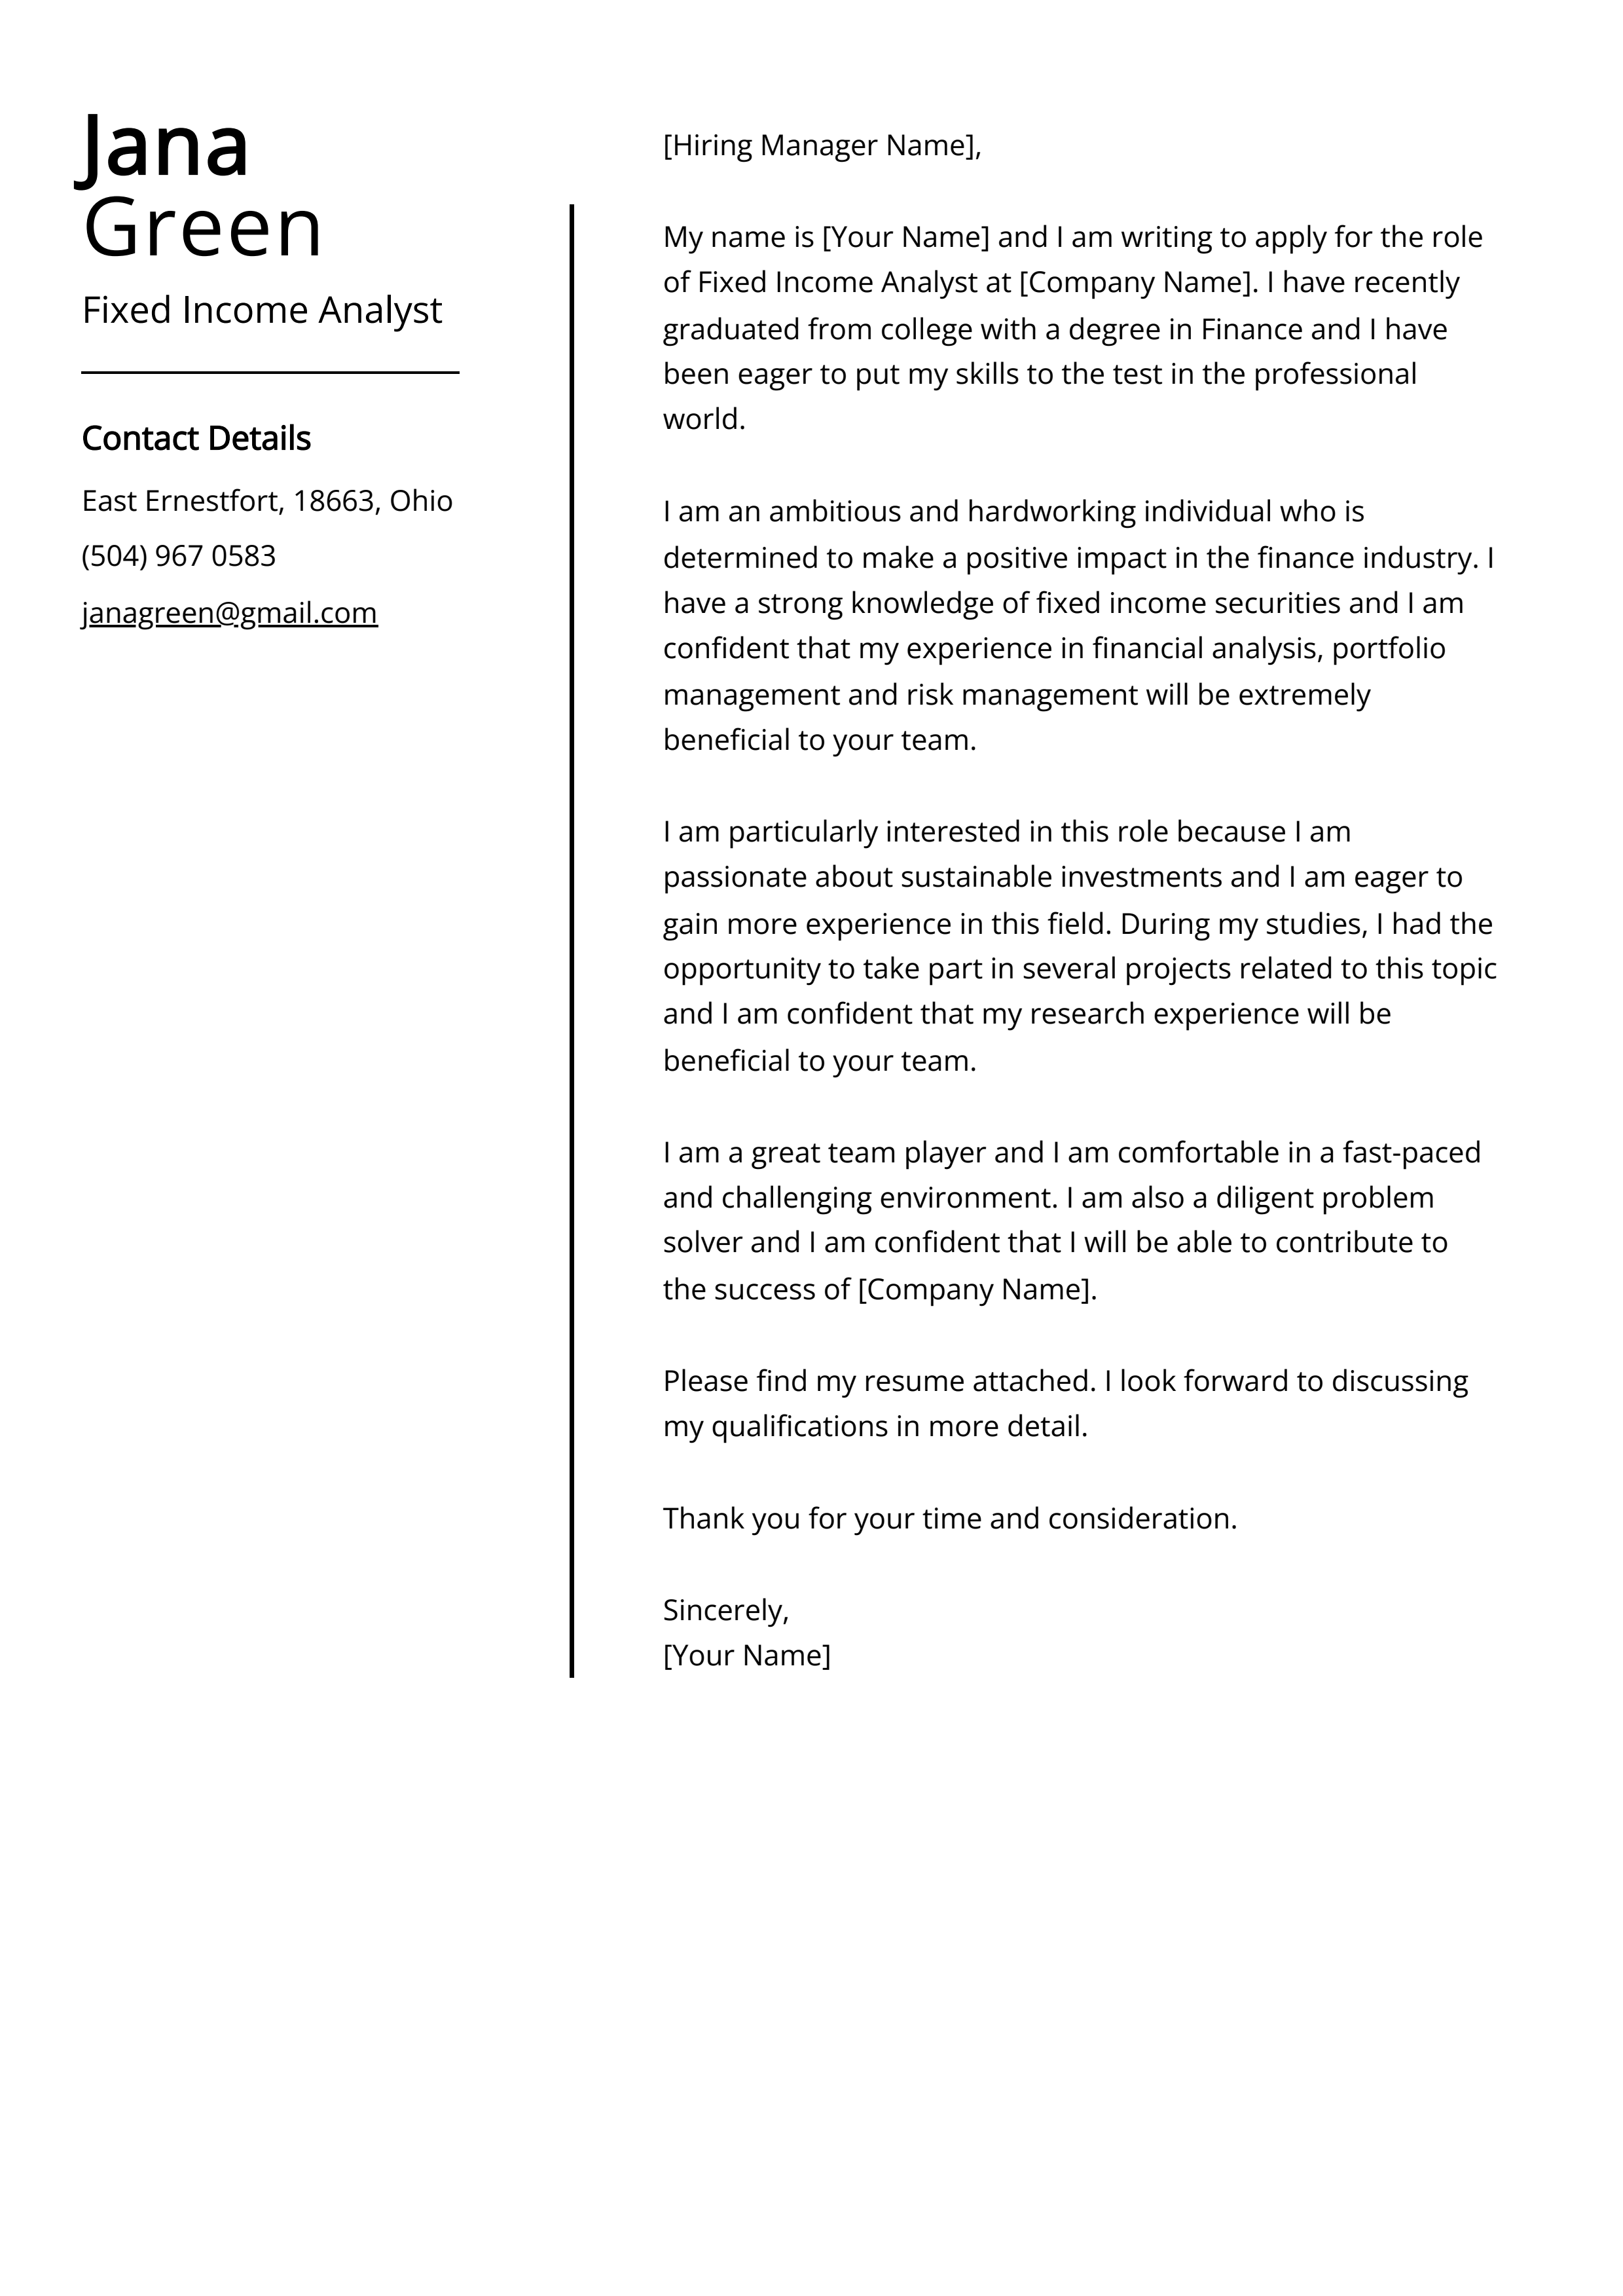 Fixed Income Analyst Cover Letter Example